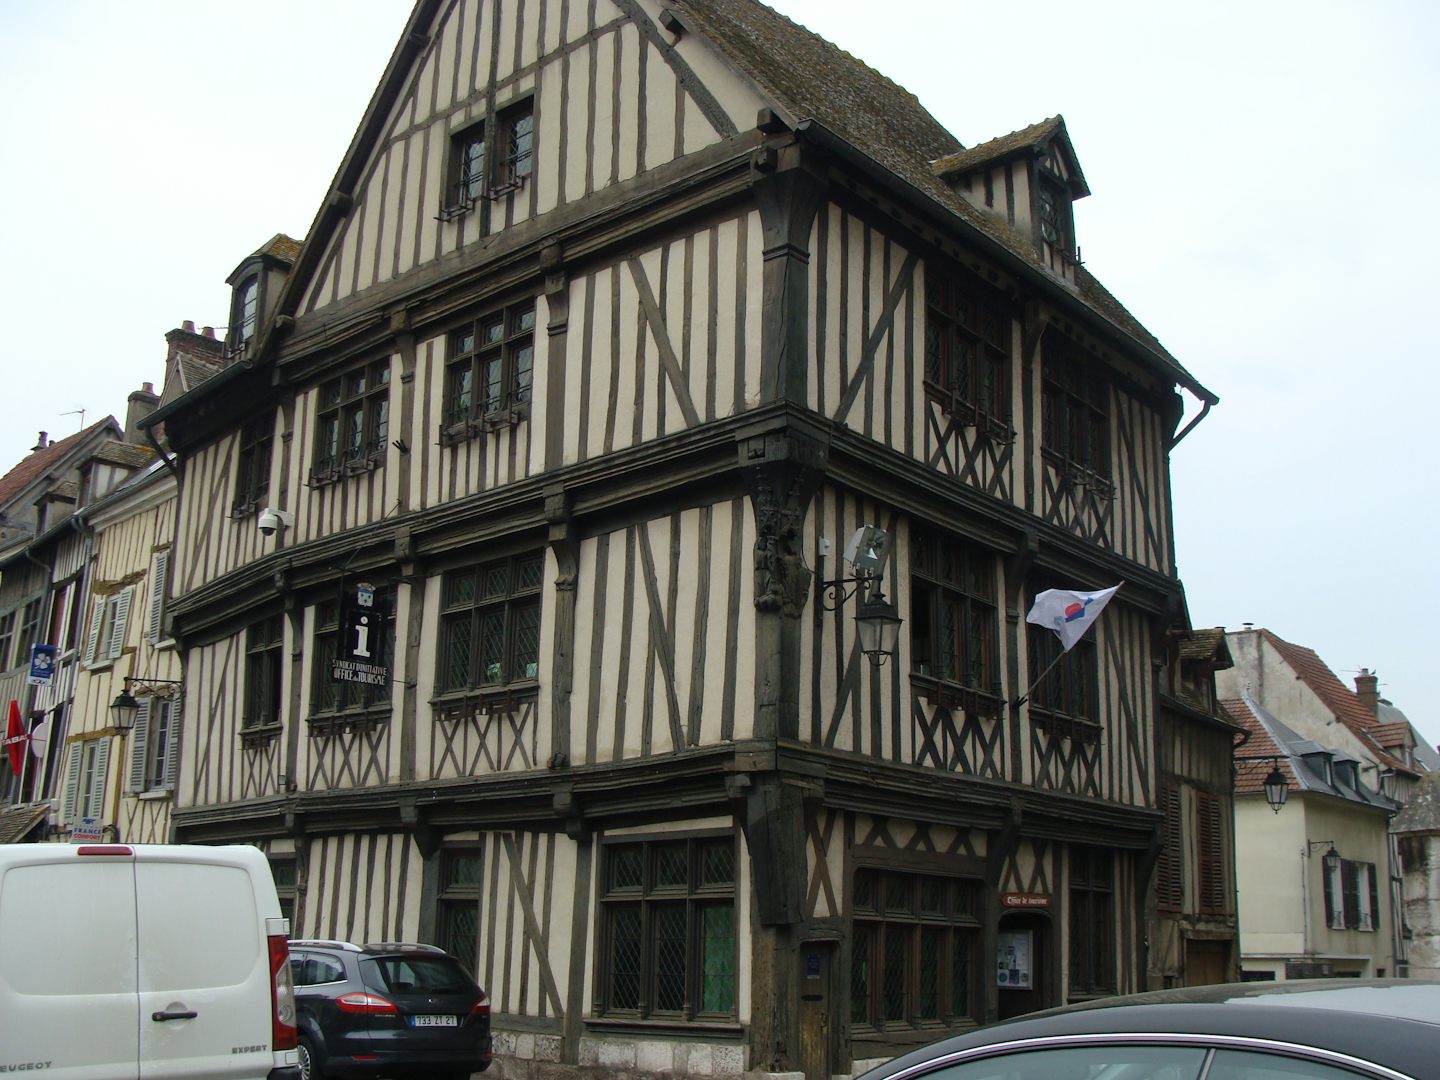 Half timbered house in Vernon